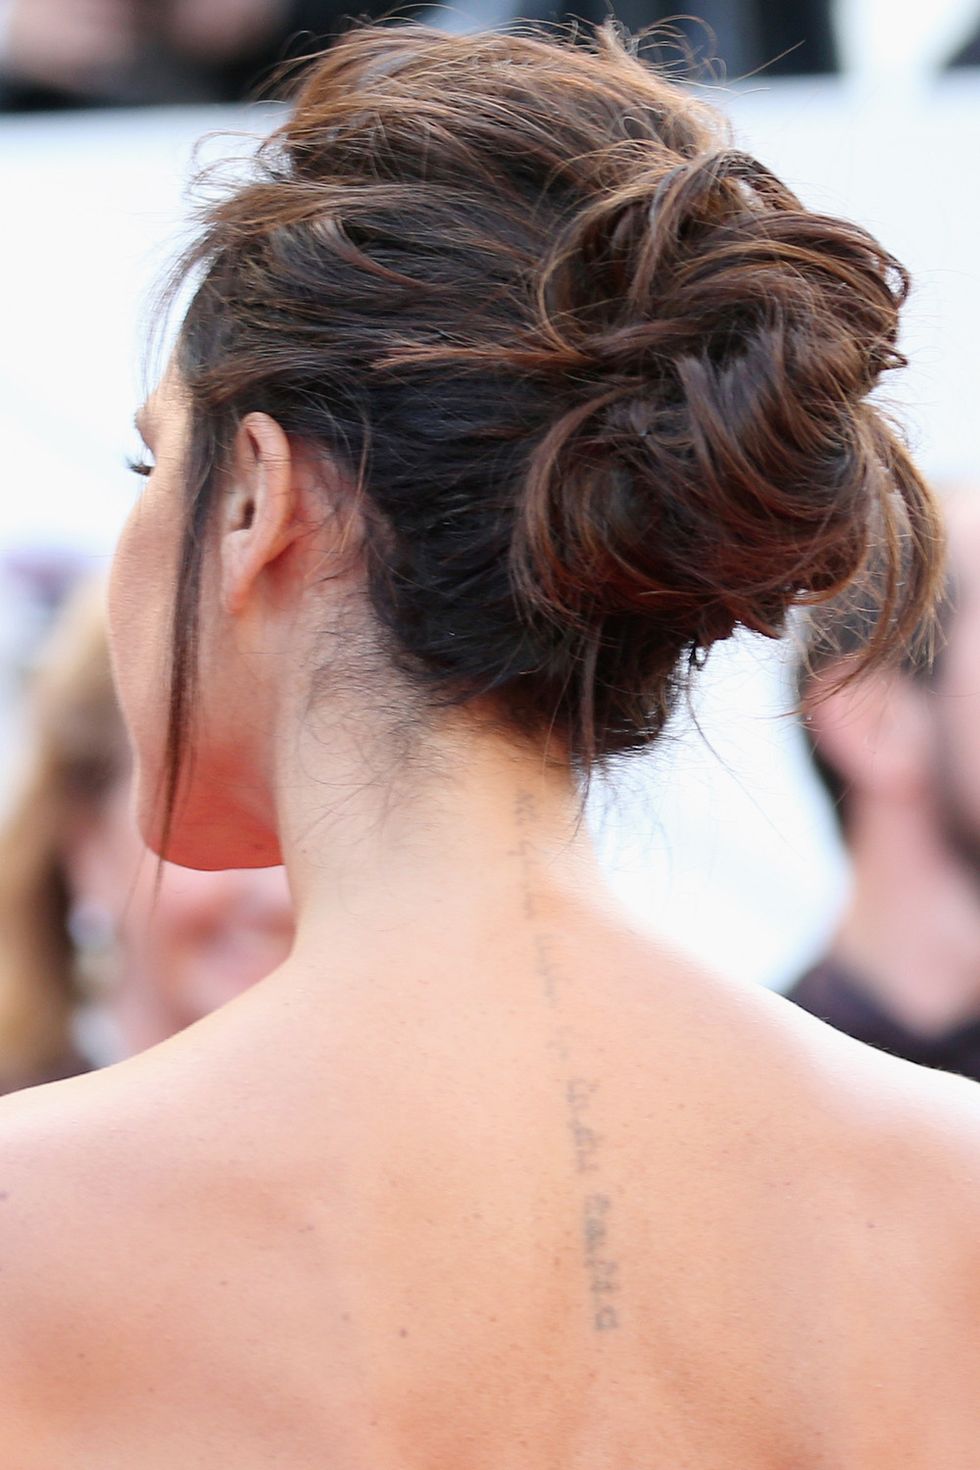 Ear, Hairstyle, Skin, Shoulder, Joint, Back, Style, Beauty, Brown hair, Neck, 